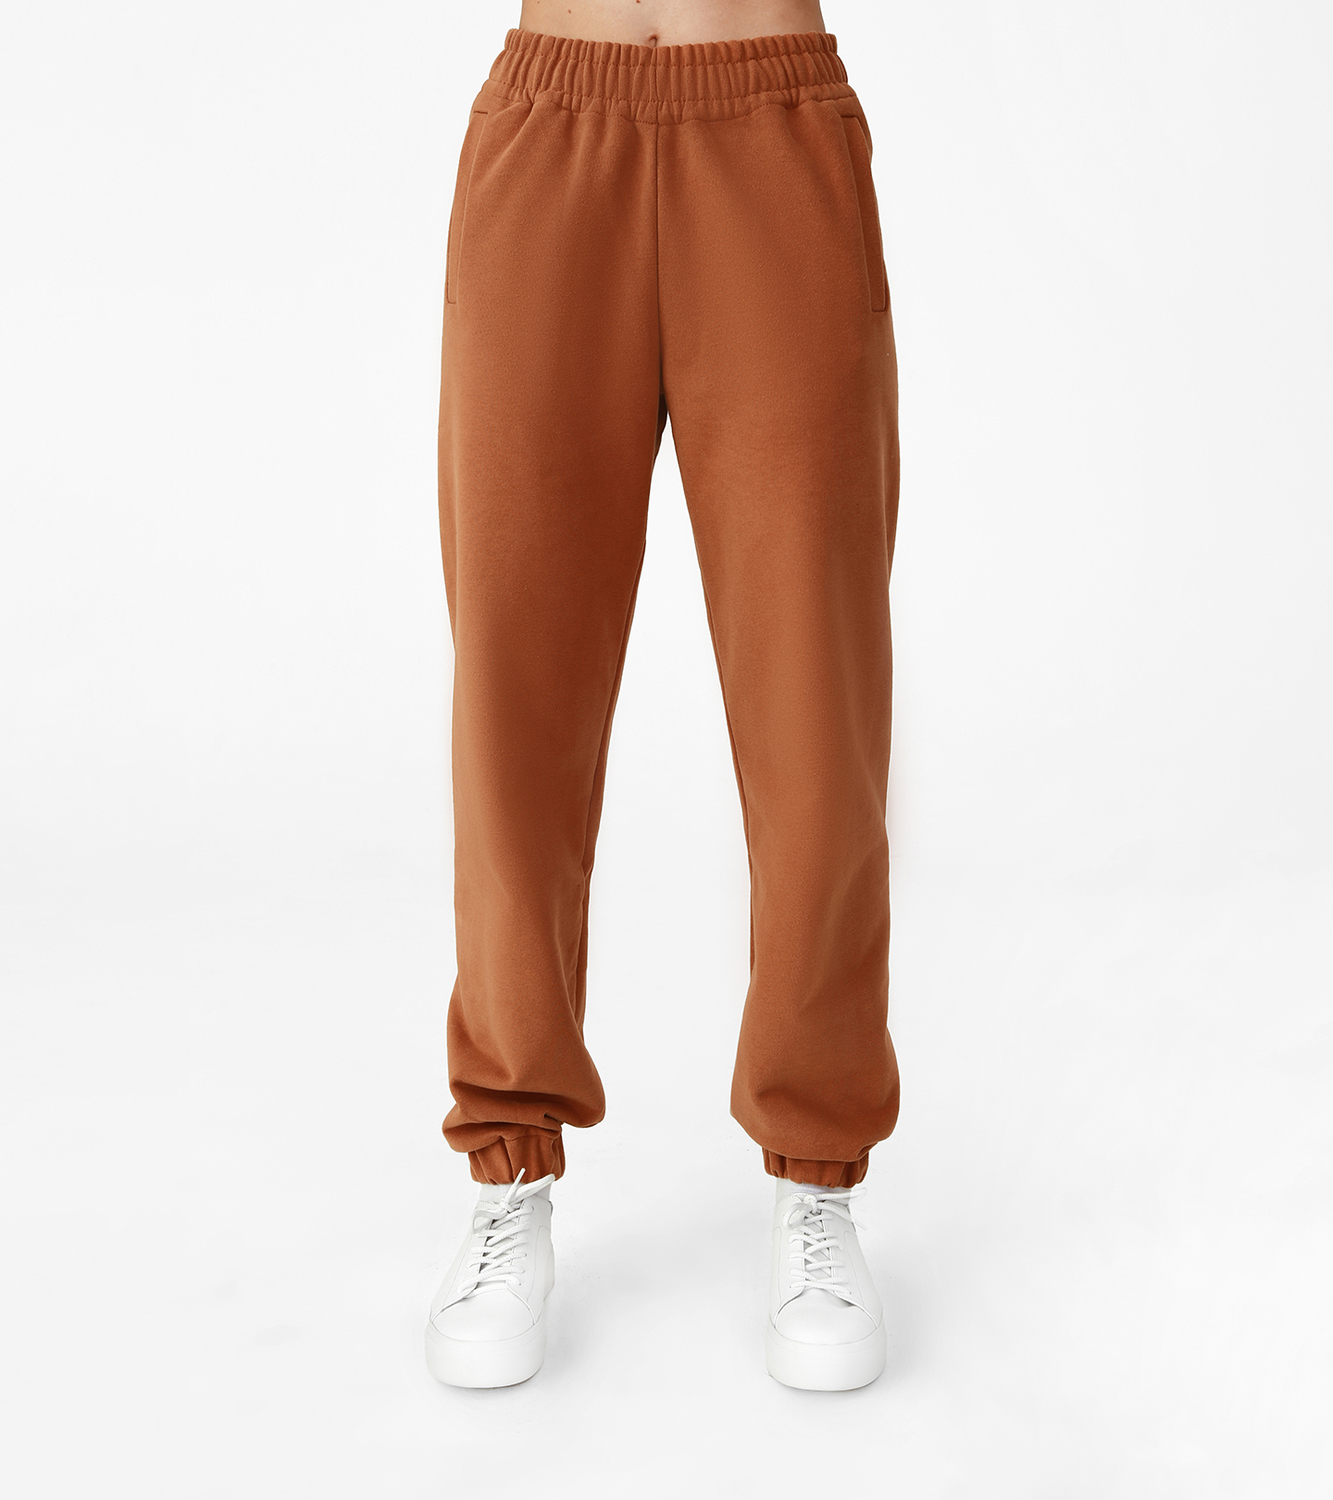 TRACK PANTS (WOMEN) CLAY BROWN - 1